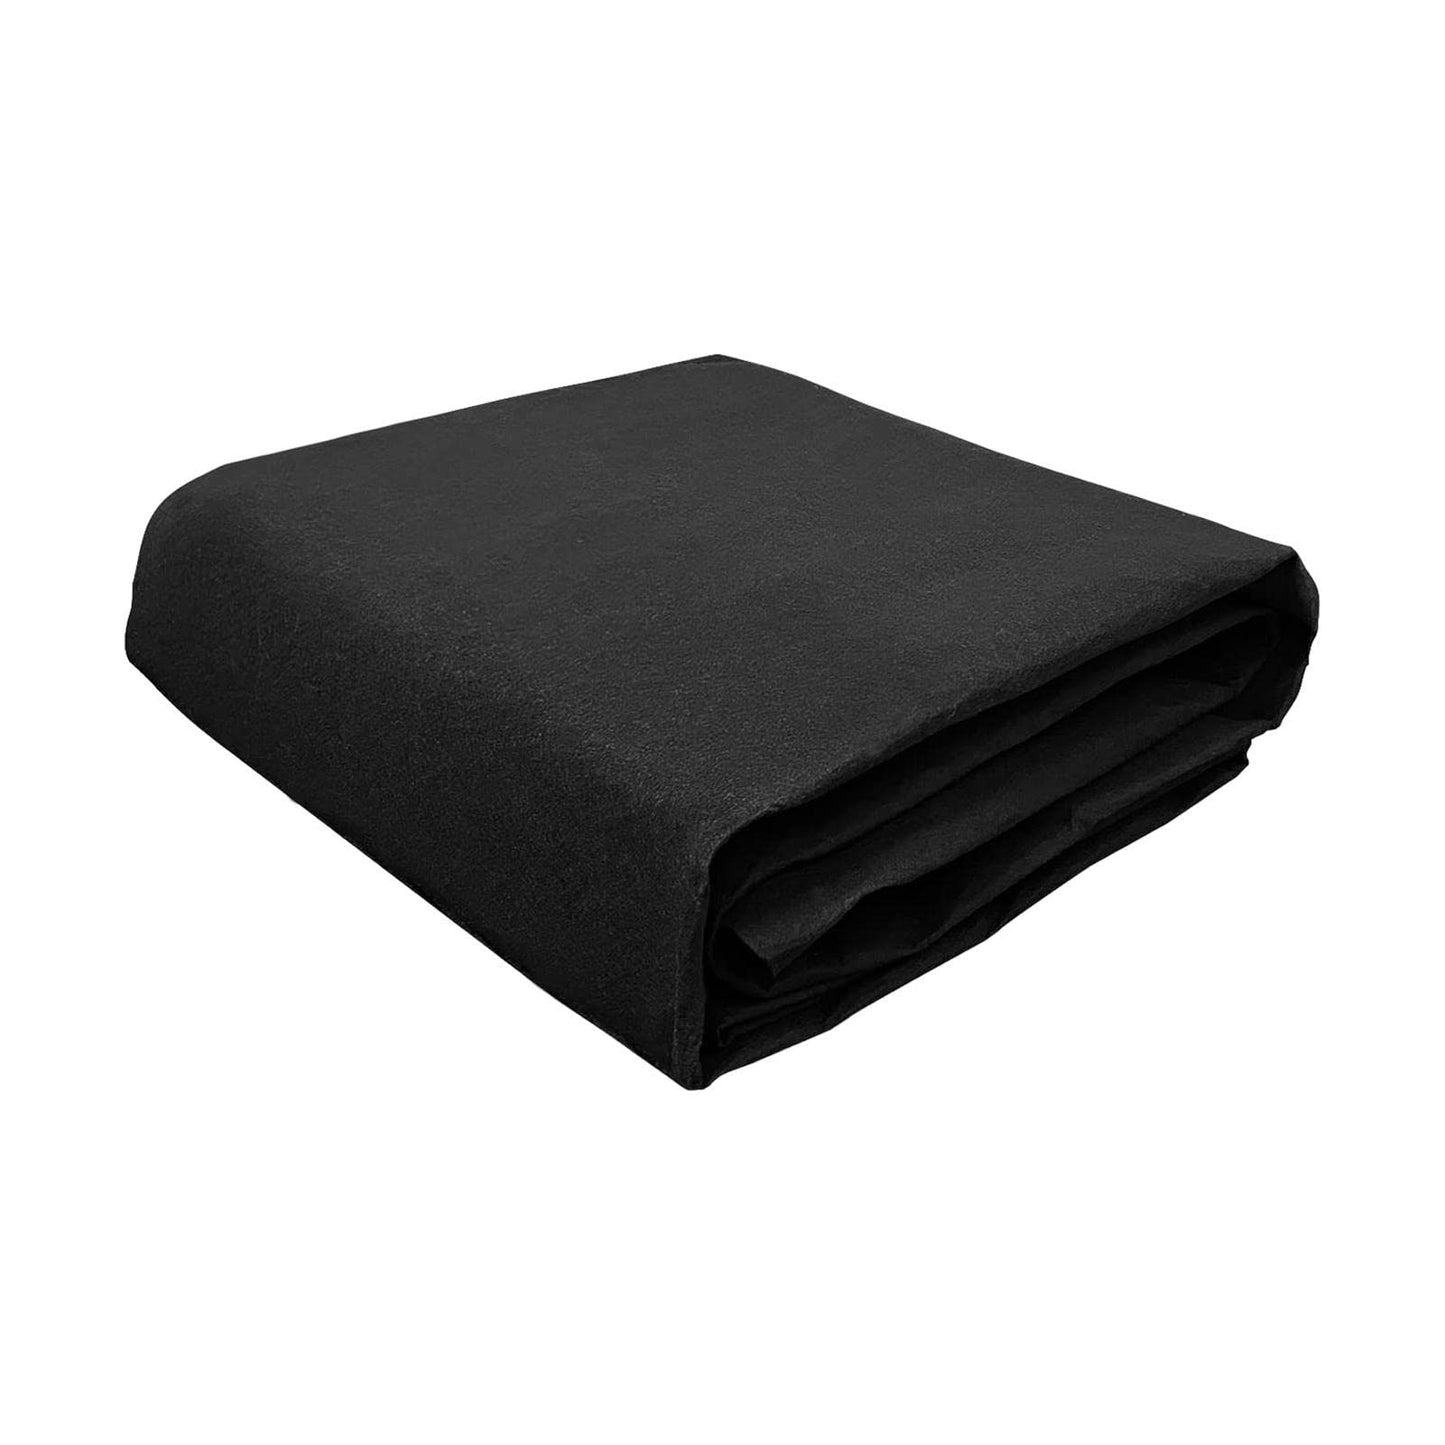 13ft Ground Pool Pads for Above Ground Pool - Pool Ground Mats for Pool Bottom - Extra Large Hot Tub Pad, 13 Foot Round Pool Liner Pad, Water Absorb Felt Mat, Inflatable Hot Tubs Floor Pad